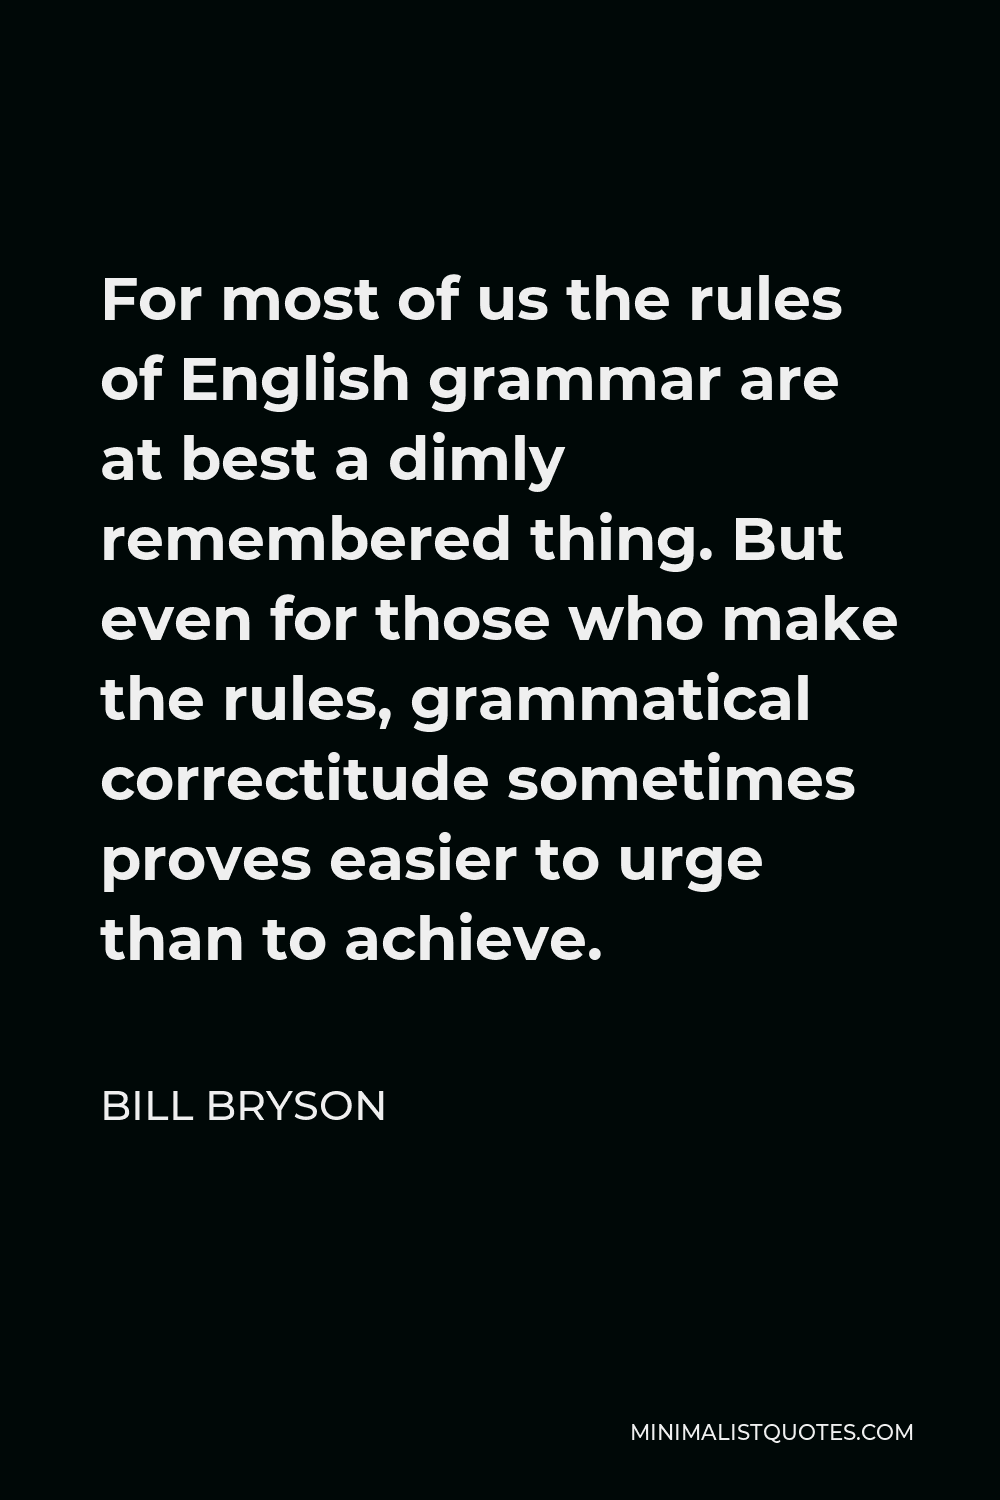 Bill Bryson Quote - For most of us the rules of English grammar are at best a dimly remembered thing. But even for those who make the rules, grammatical correctitude sometimes proves easier to urge than to achieve.